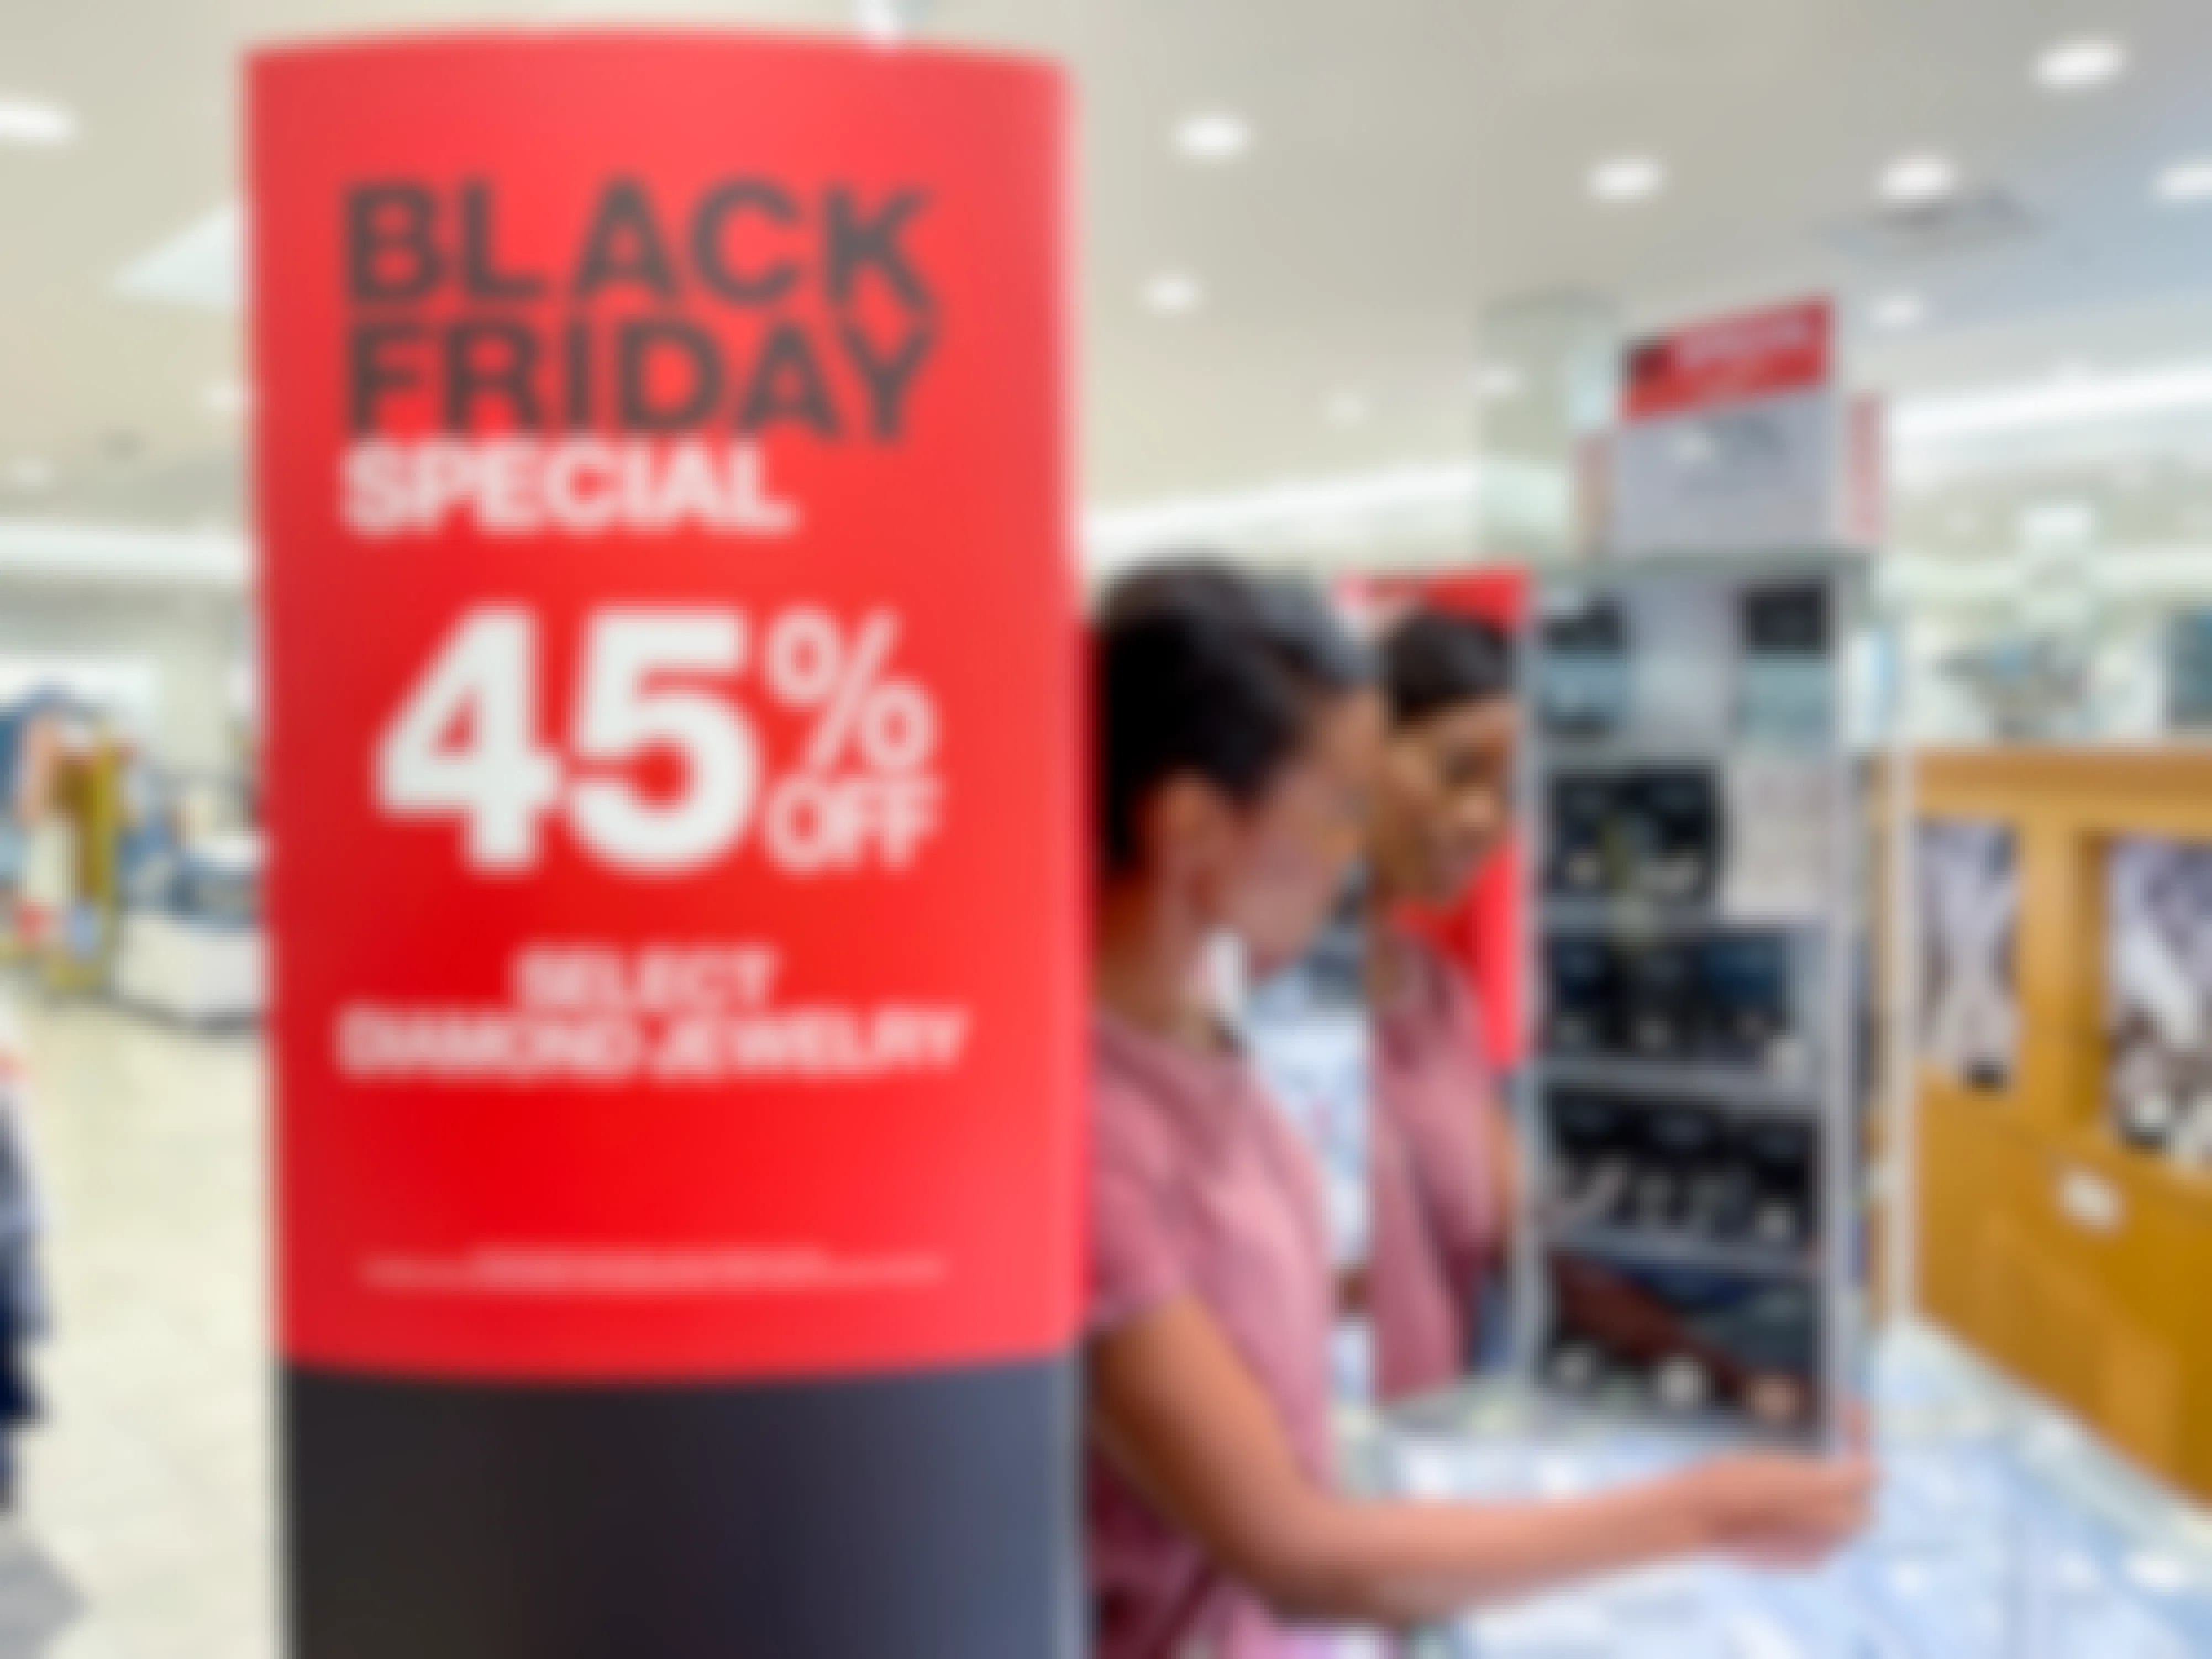 A 45% off Black Friday sign in a Macy's store next to a person looking at a display on the jewelry counter.